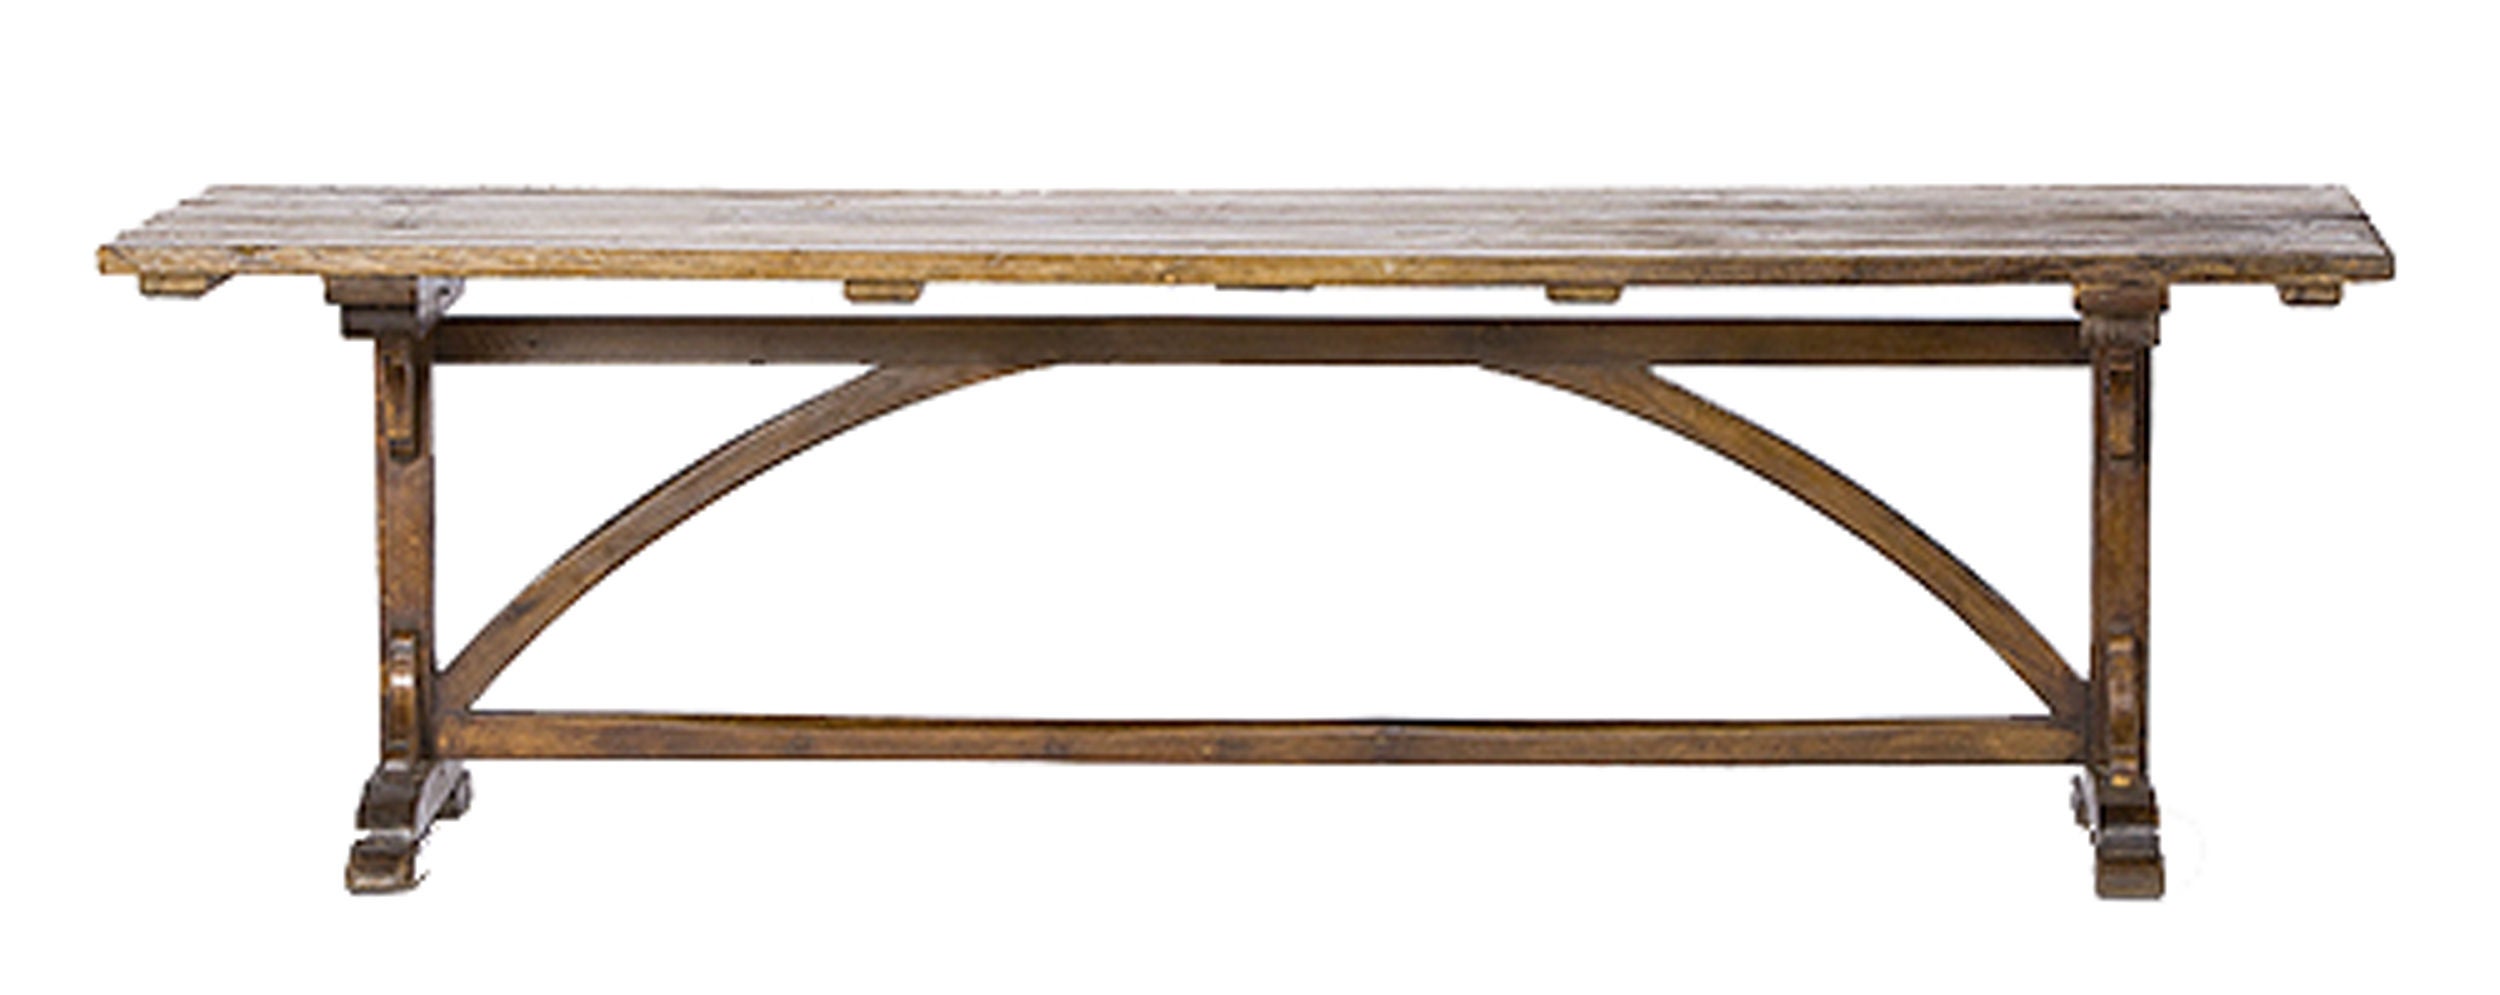 A Fine Elm Wood Swedish Farm Table.<br />
<br />
Reduced From: $28,000